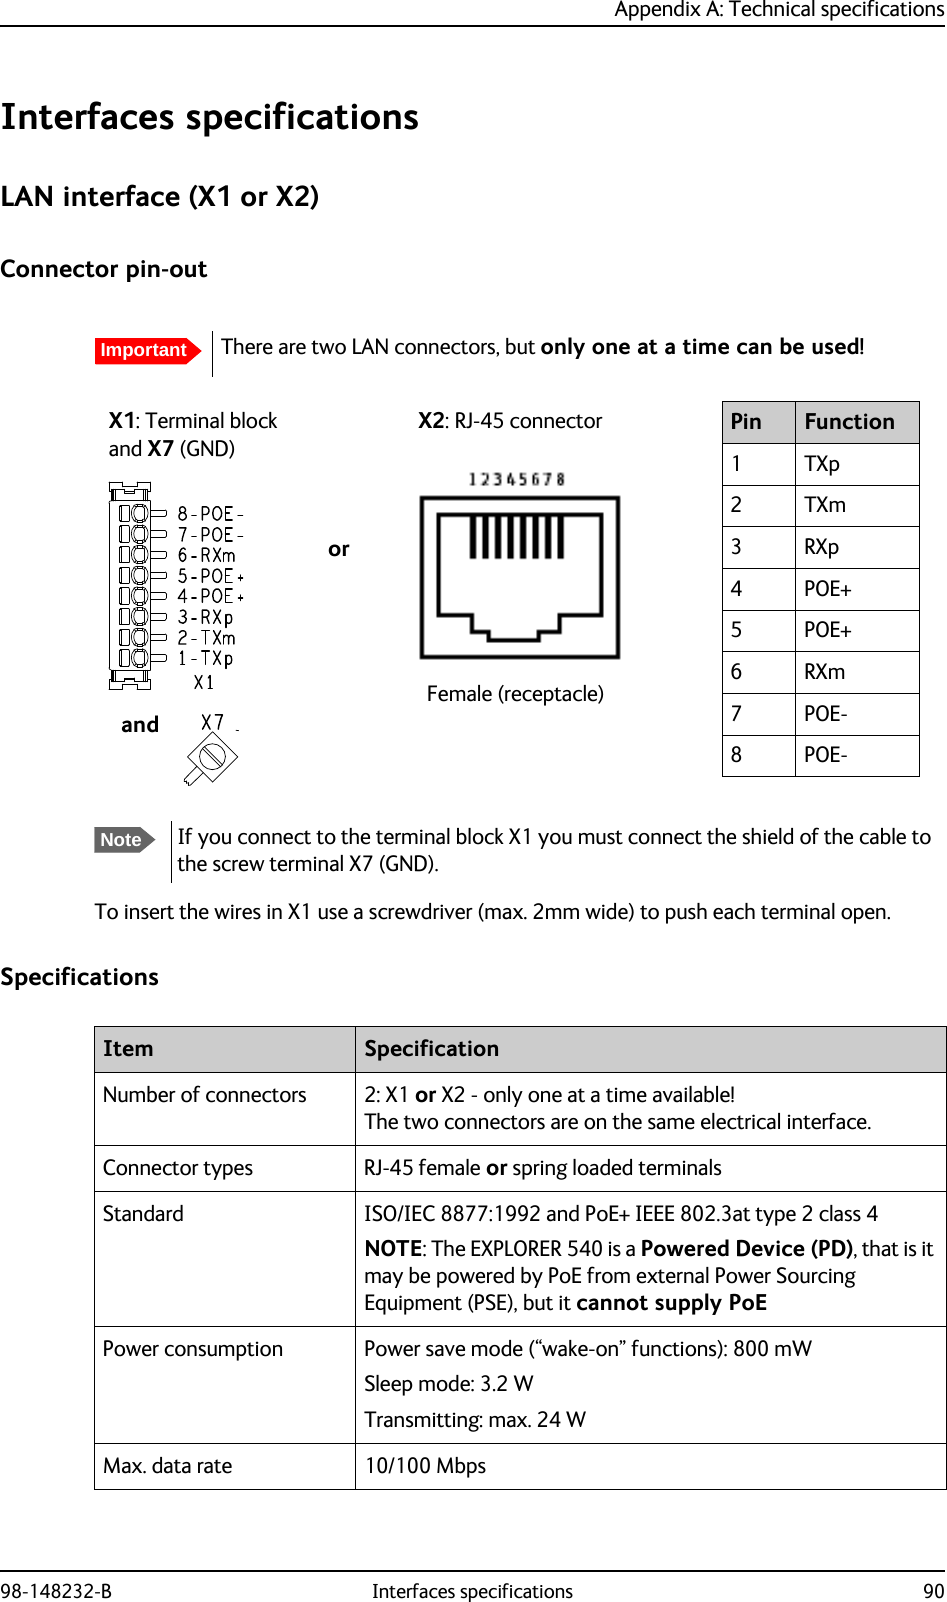 Appendix A: Technical specifications98-148232-B Interfaces specifications 90Interfaces specificationsLAN interface (X1 or X2)Connector pin-outTo insert the wires in X1 use a screwdriver (max. 2mm wide) to push each terminal open.SpecificationsImportantThere are two LAN connectors, but only one at a time can be used! Pin Function1TXp2TXm3RXp4POE+5POE+6RXm7POE-8POE-NoteIf you connect to the terminal block X1 you must connect the shield of the cable to the screw terminal X7 (GND).X1: Terminal blockand X7 (GND)orFemale (receptacle)X2: RJ-45 connectorandItem SpecificationNumber of connectors 2: X1 or X2 - only one at a time available! The two connectors are on the same electrical interface.Connector types RJ-45 female or spring loaded terminalsStandard ISO/IEC 8877:1992 and PoE+ IEEE 802.3at type 2 class 4NOTE: The EXPLORER 540 is a Powered Device (PD), that is it may be powered by PoE from external Power Sourcing Equipment (PSE), but it cannot supply PoEPower consumption Power save mode (“wake-on” functions): 800 mWSleep mode: 3.2 WTransmitting: max. 24 WMax. data rate 10/100 Mbps 